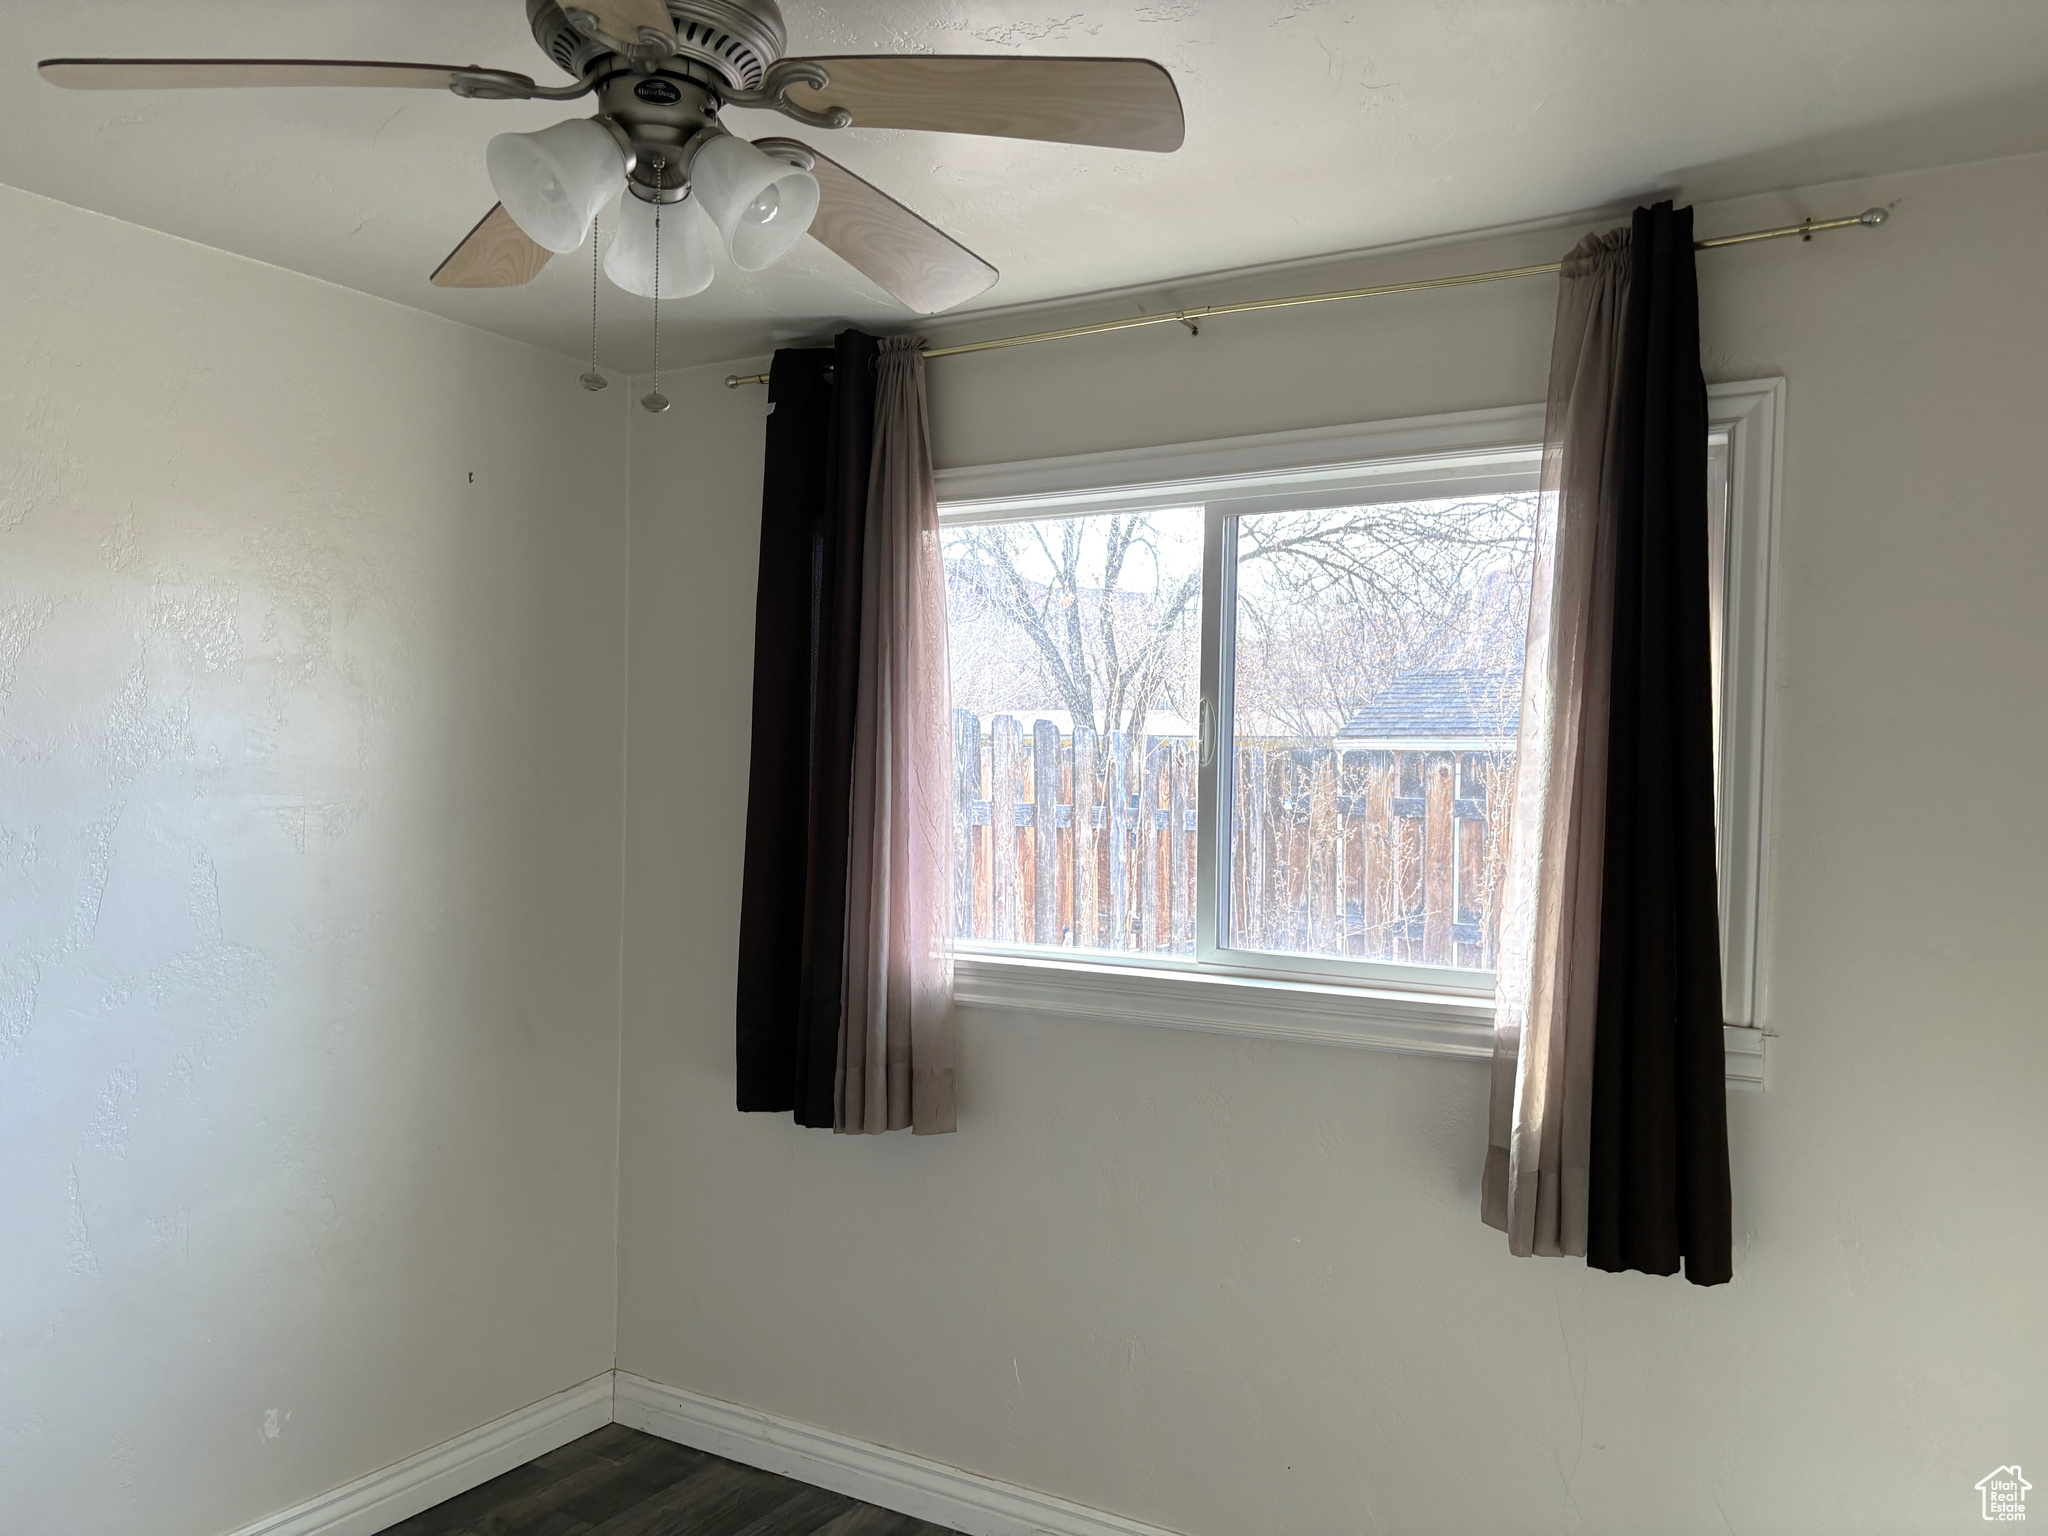 Unfurnished bedroom 2 with a healthy amount of sunlight, dark hardwood / wood-style floors, and ceiling fan